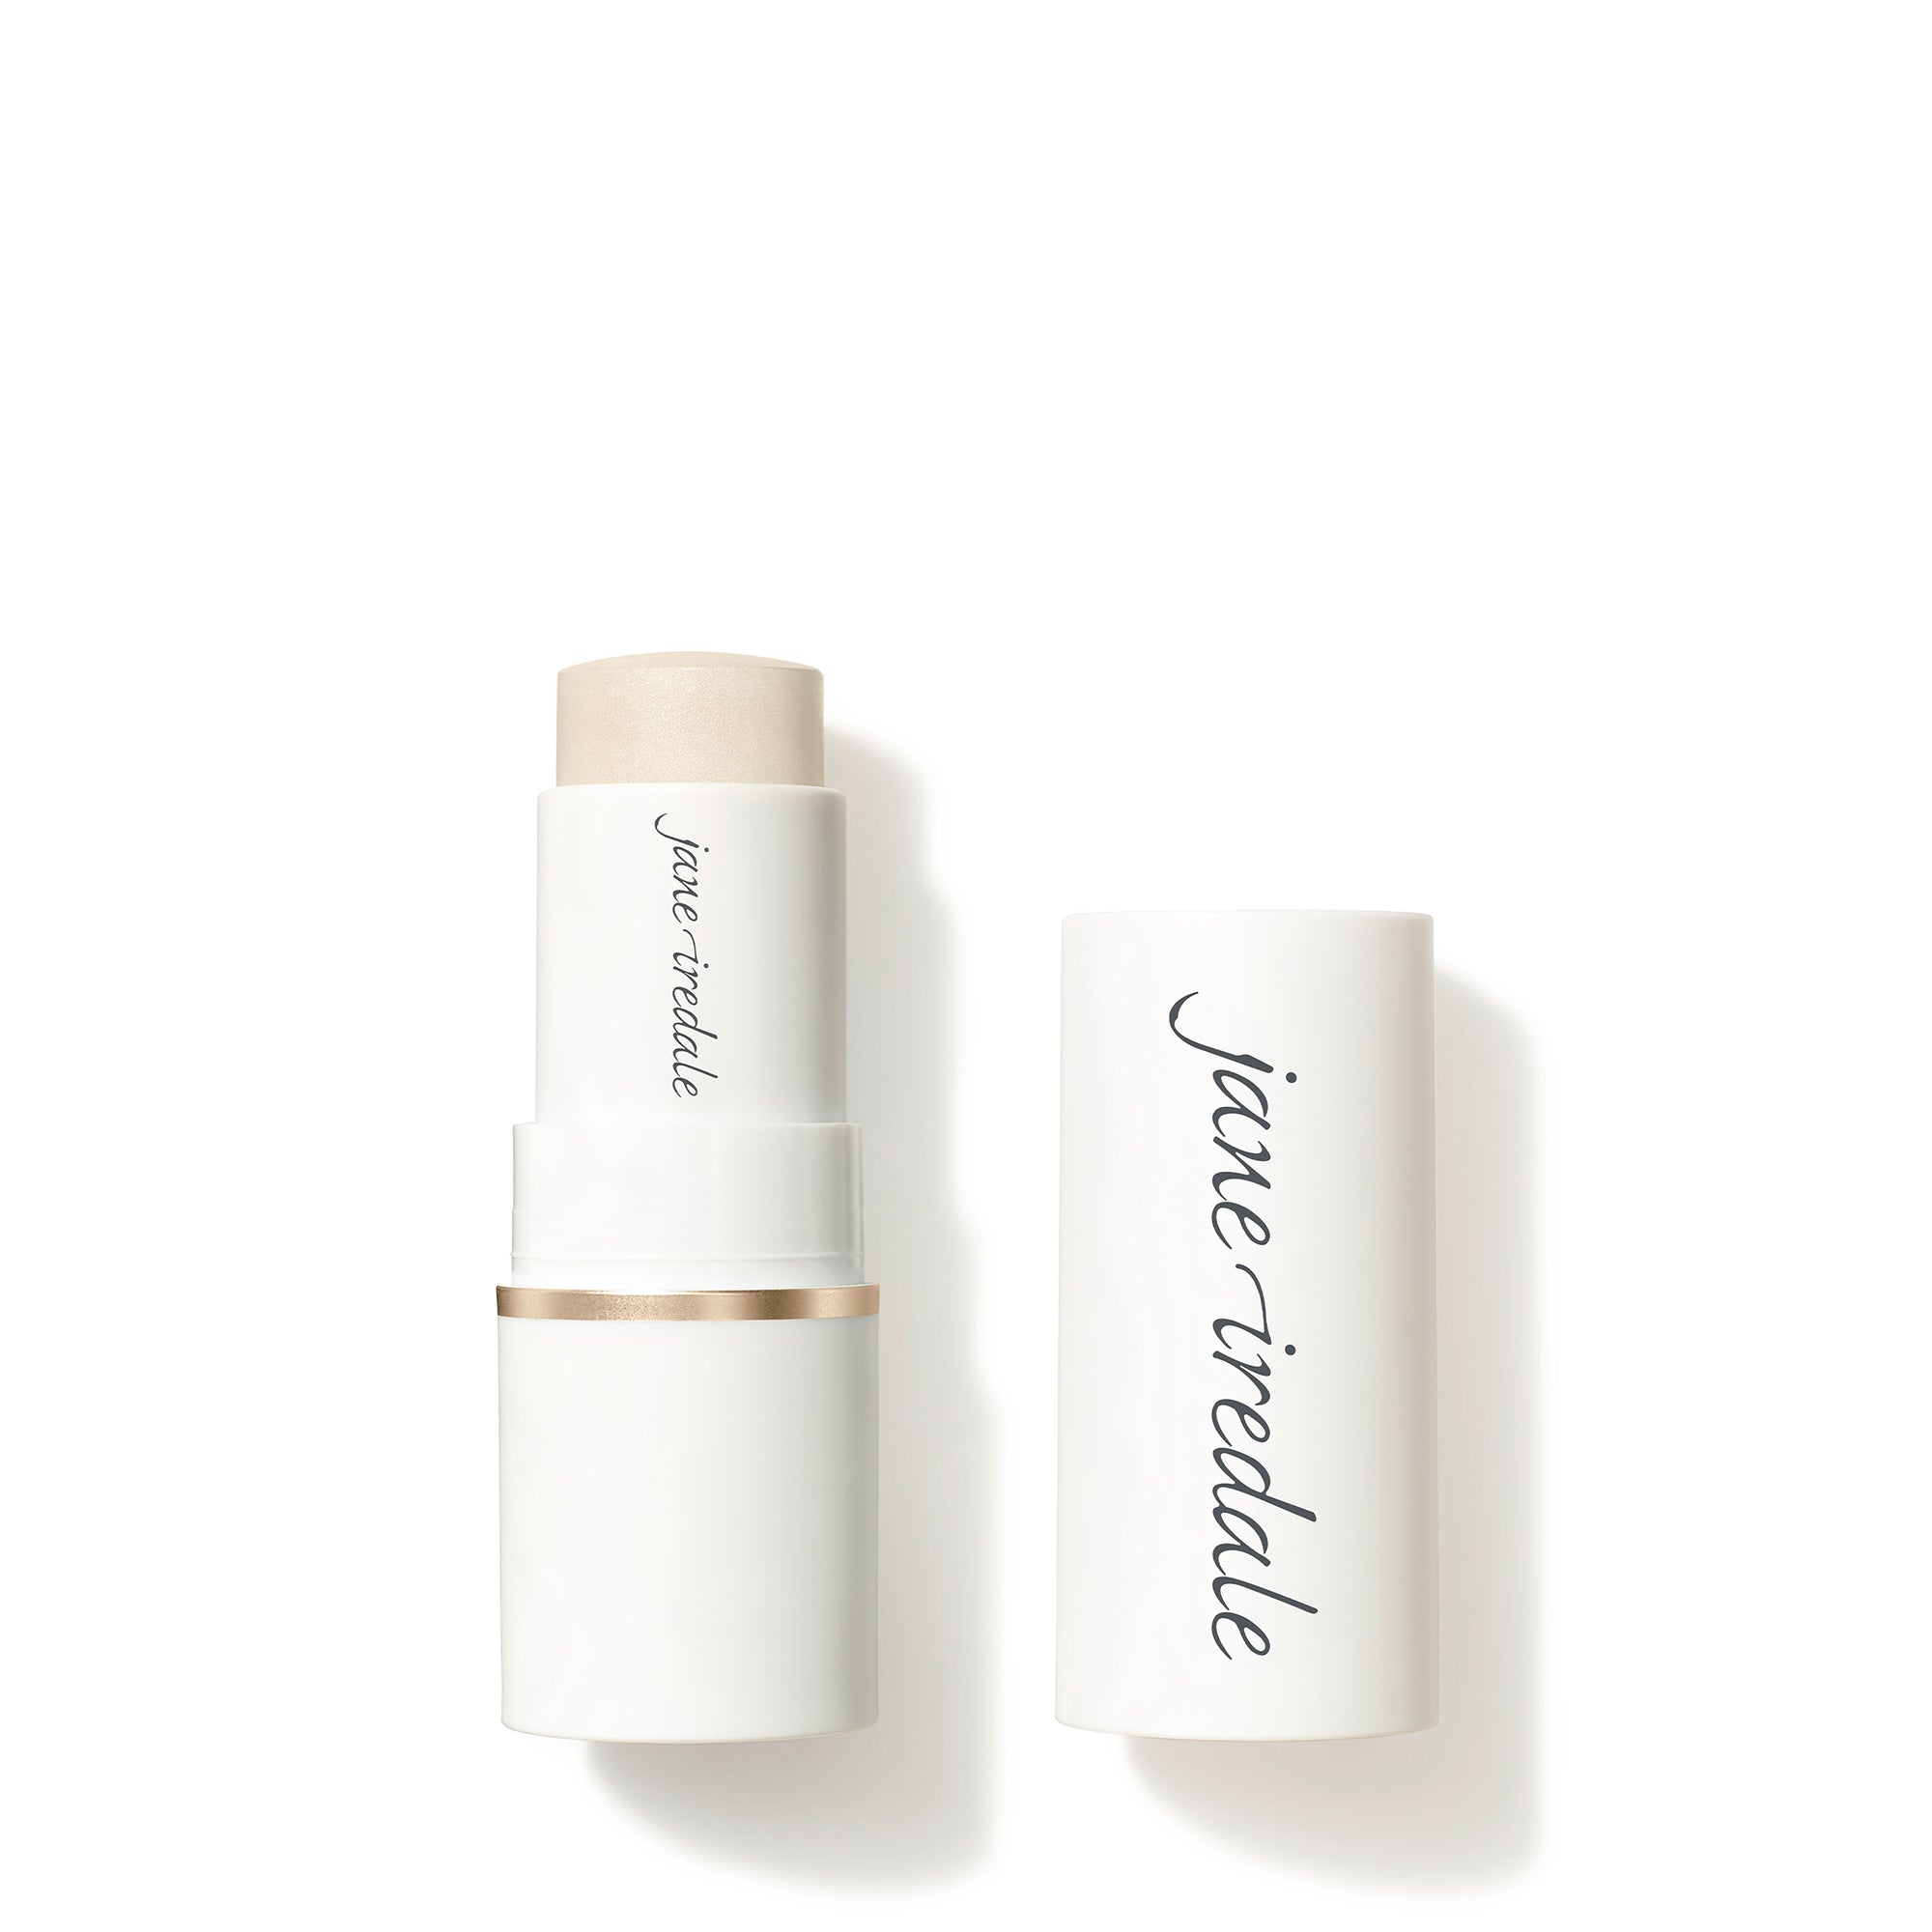 Jane Iredale Glow Time Highlighter Stick / Solstice